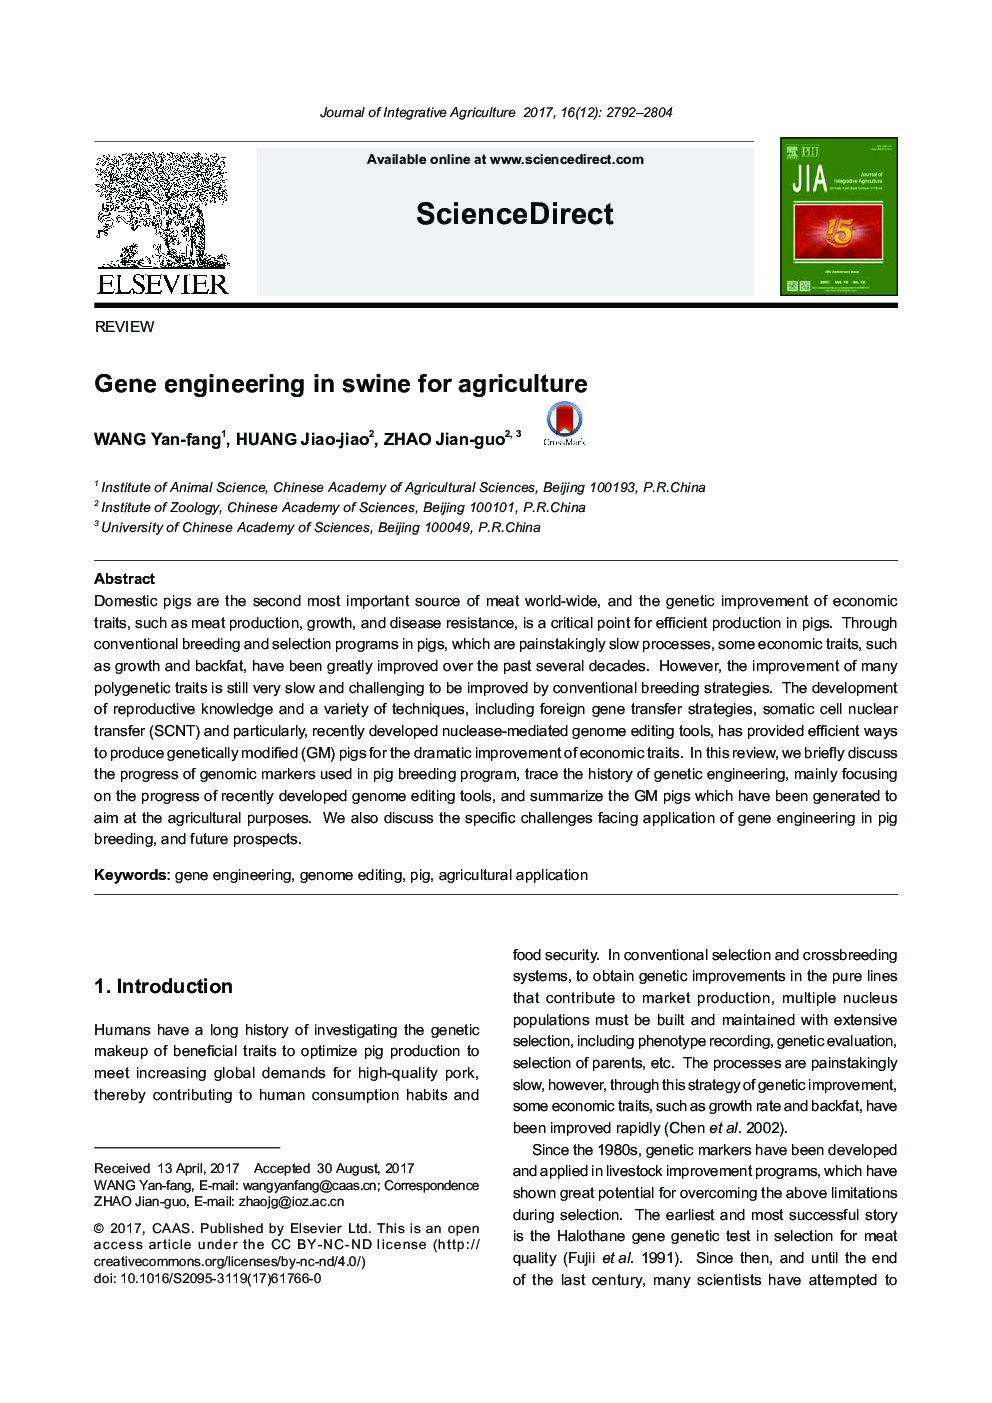 Gene engineering in swine for agriculture